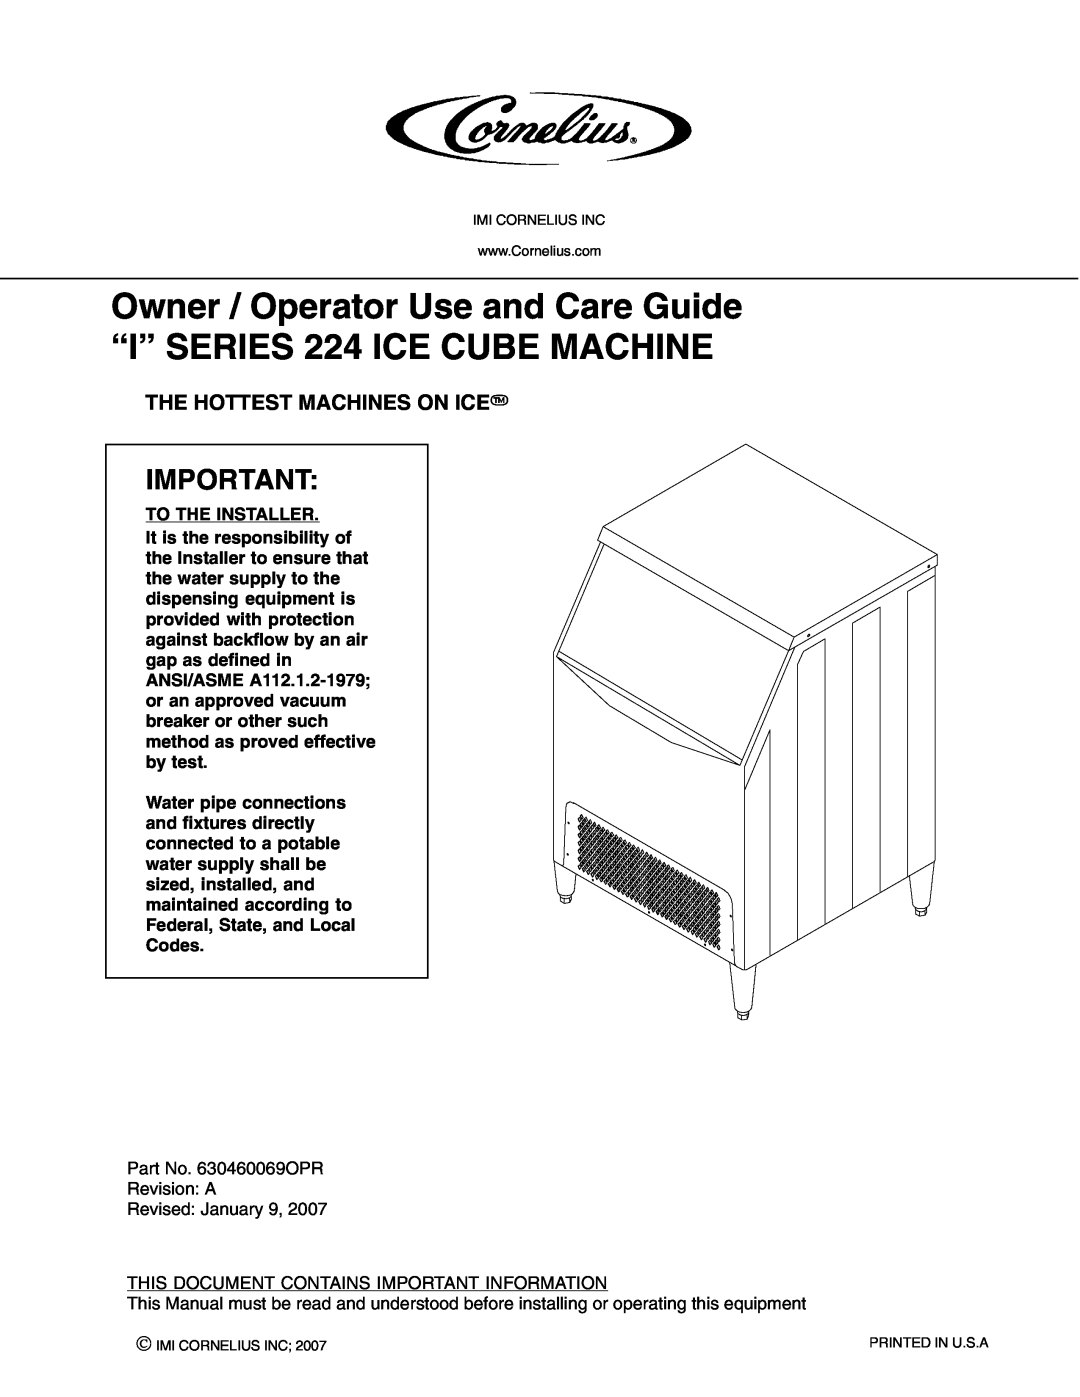 Maytag 224 manual The Hottest Machines On Icet 